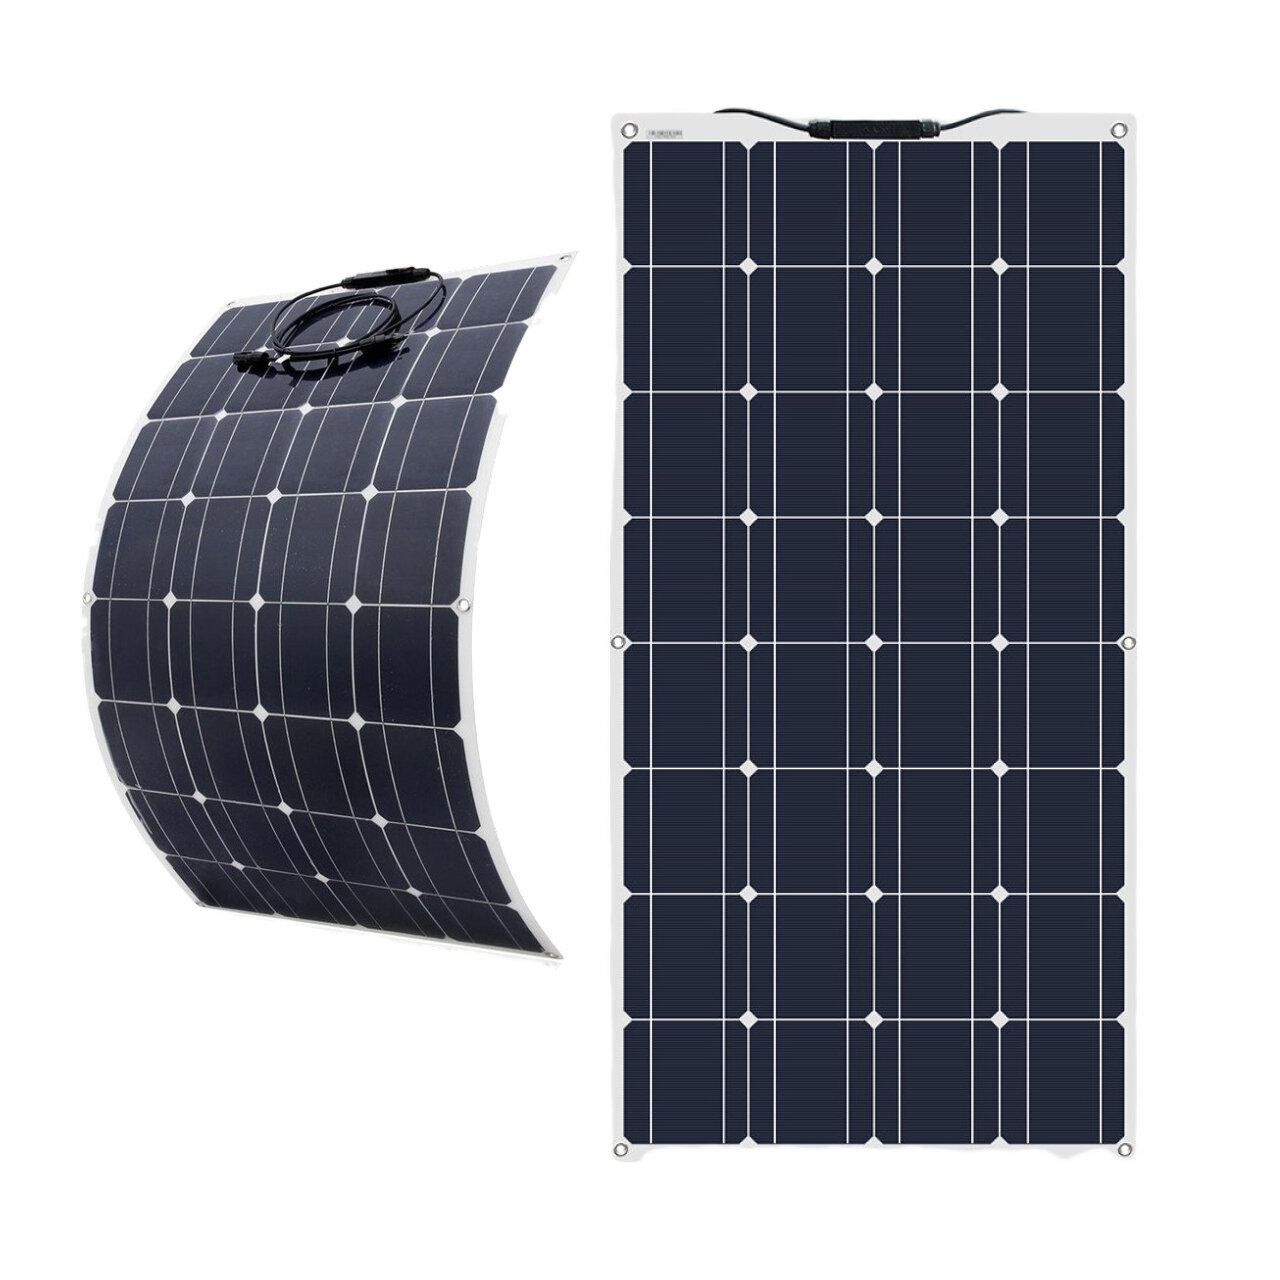 100W Solar Panel Flexible Portable Battery Charger Monocrystalline Solar Cell Outdoor Camping Travel